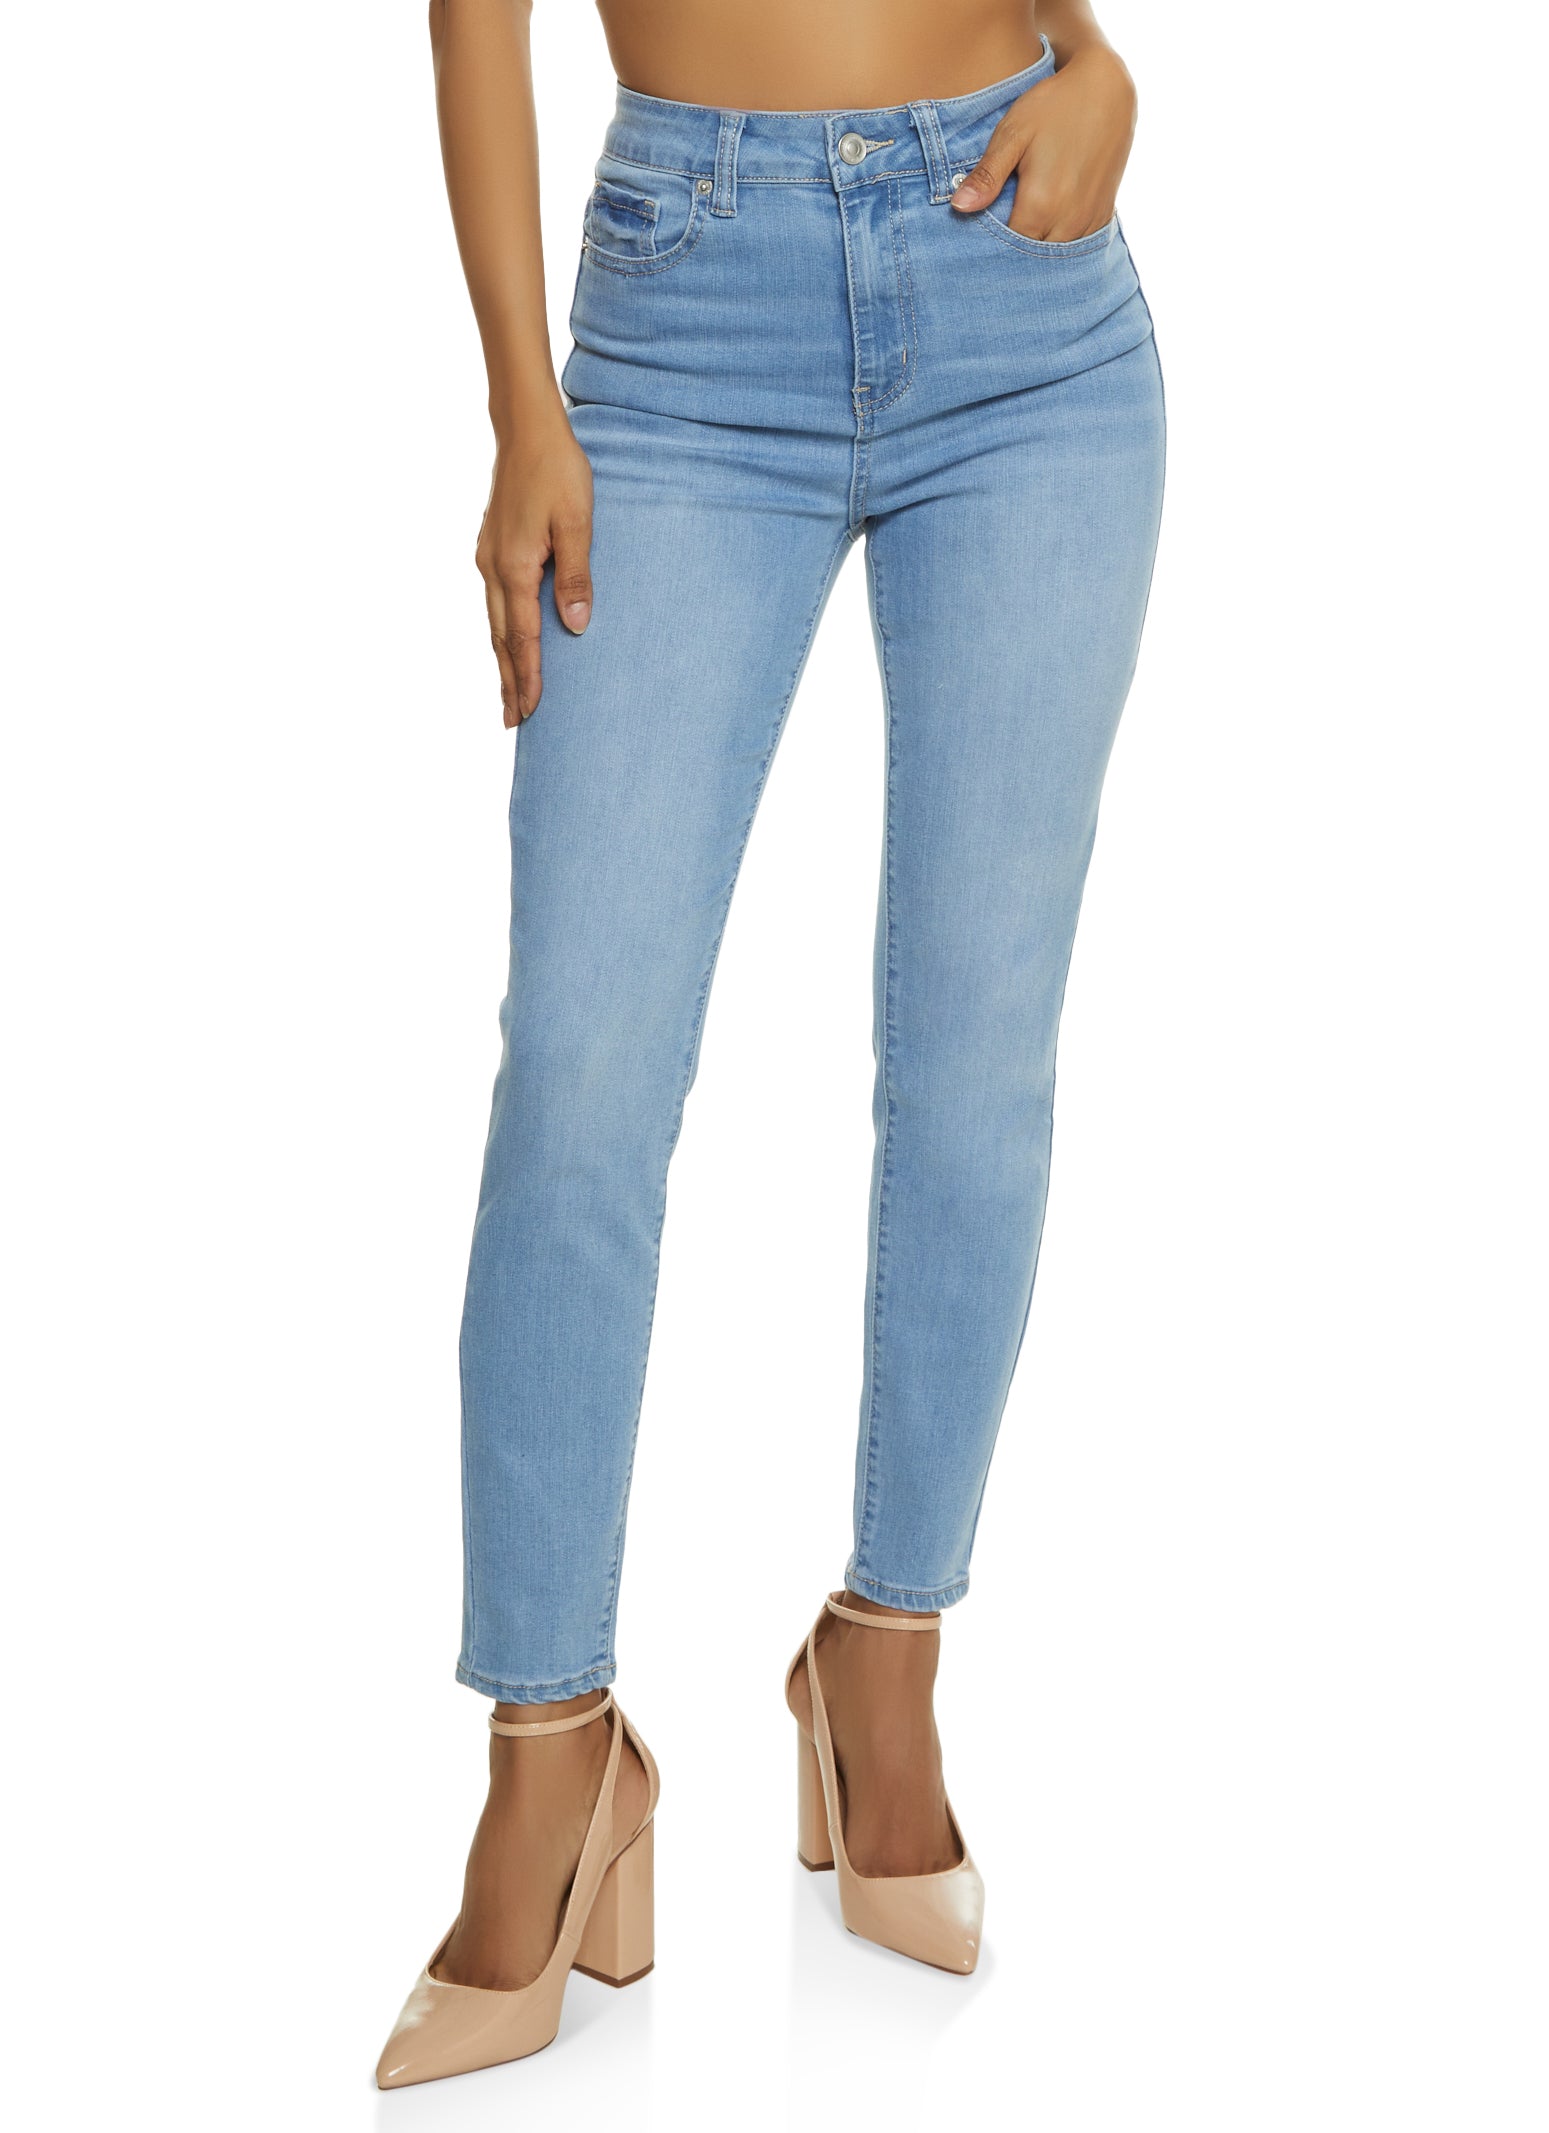 Wax Jeans Women's High Waisted & Tummy Slimming Jeans - 90219Xl